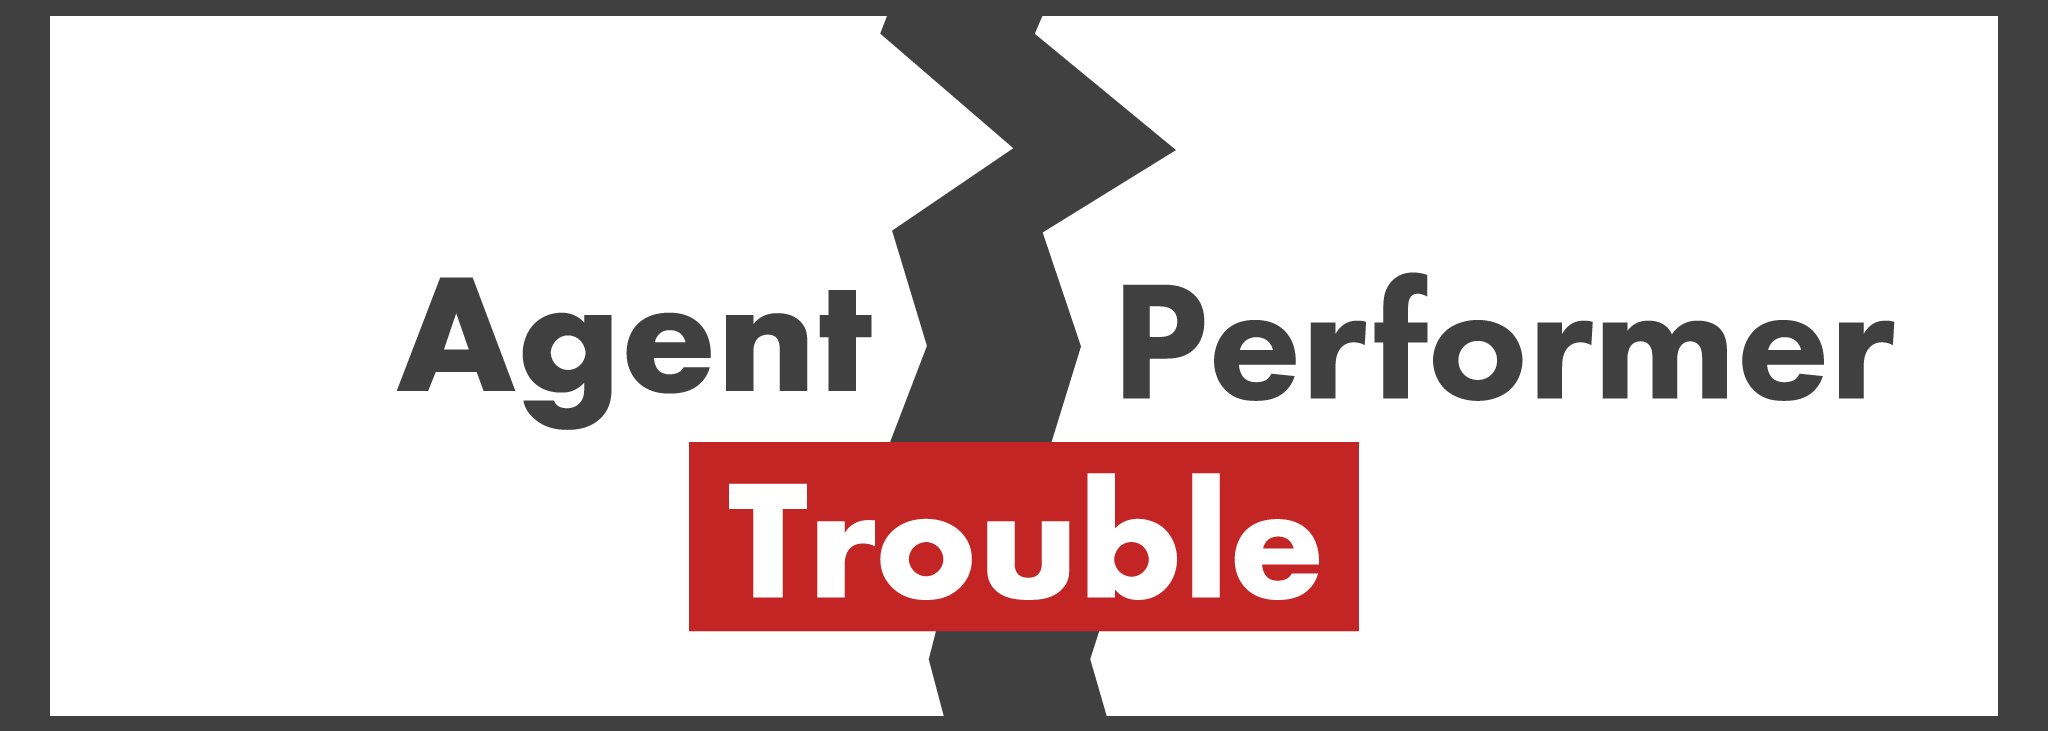 AGENT PERFORMER TROUBLE ILLUSTRATION